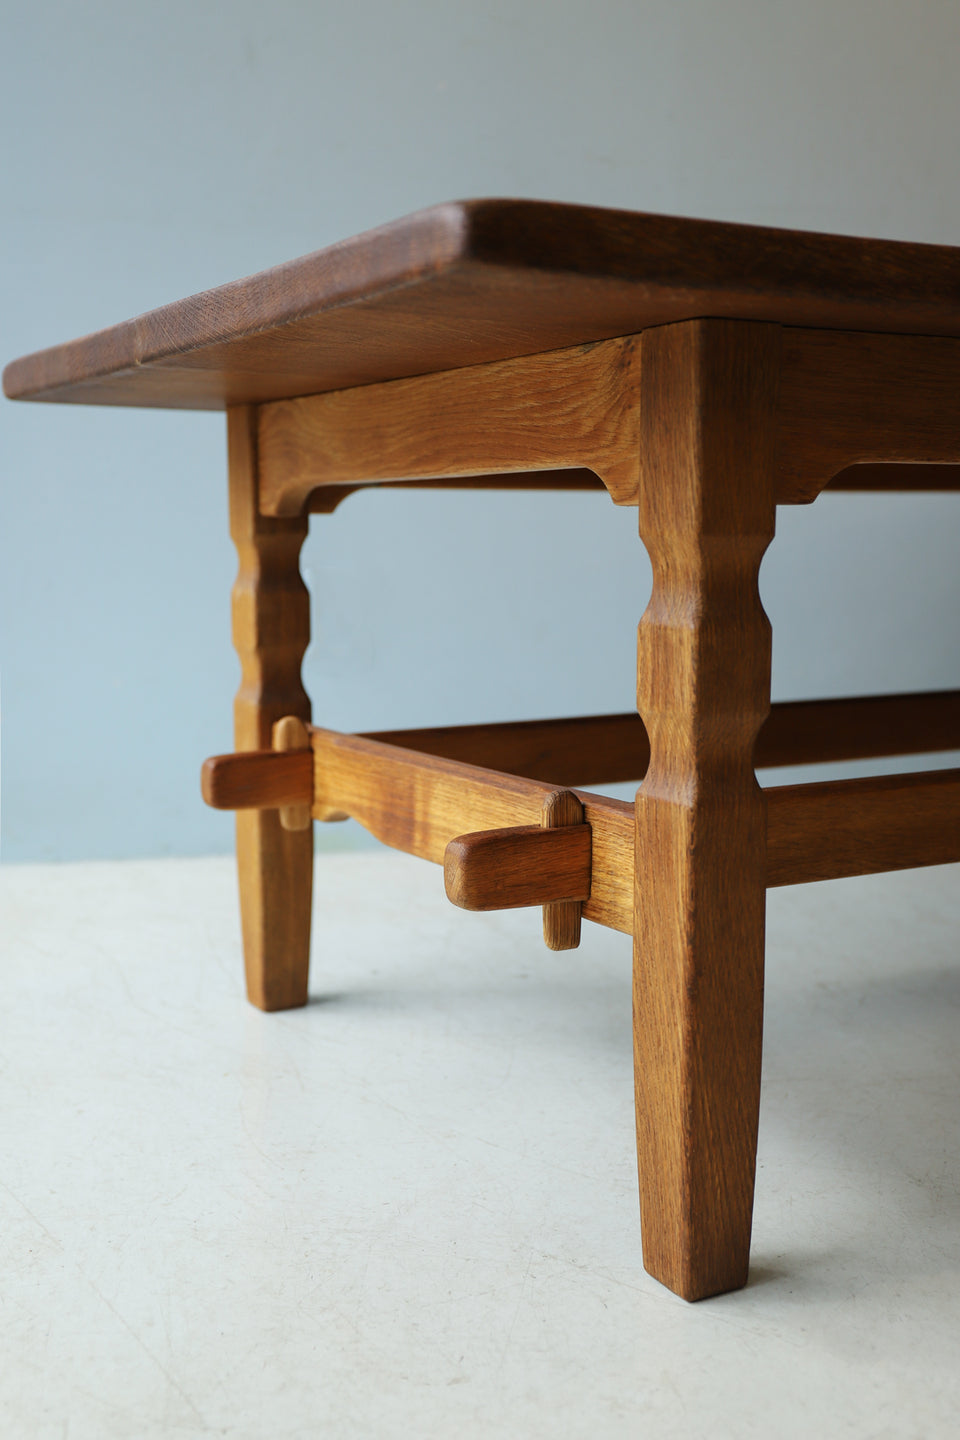 Denmark Vintage Center Table by Henning Kjaernulf / デンマーク ヴィンテージ センターテーブル 北欧家具